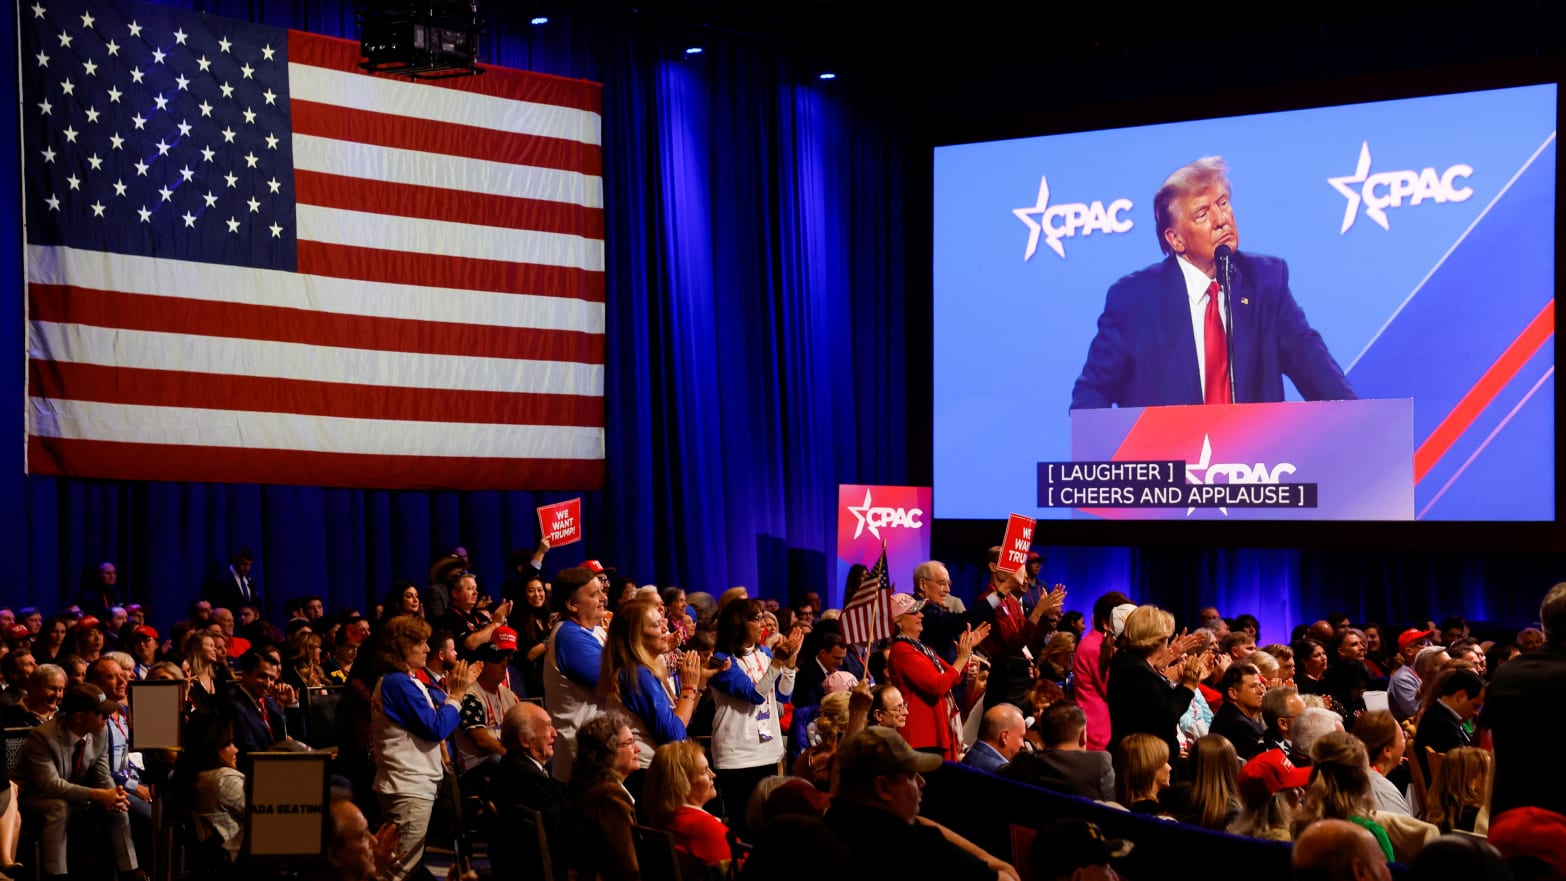 A monitor shows Donald Trump speaking at CPAC as supporters in the crowd cheer